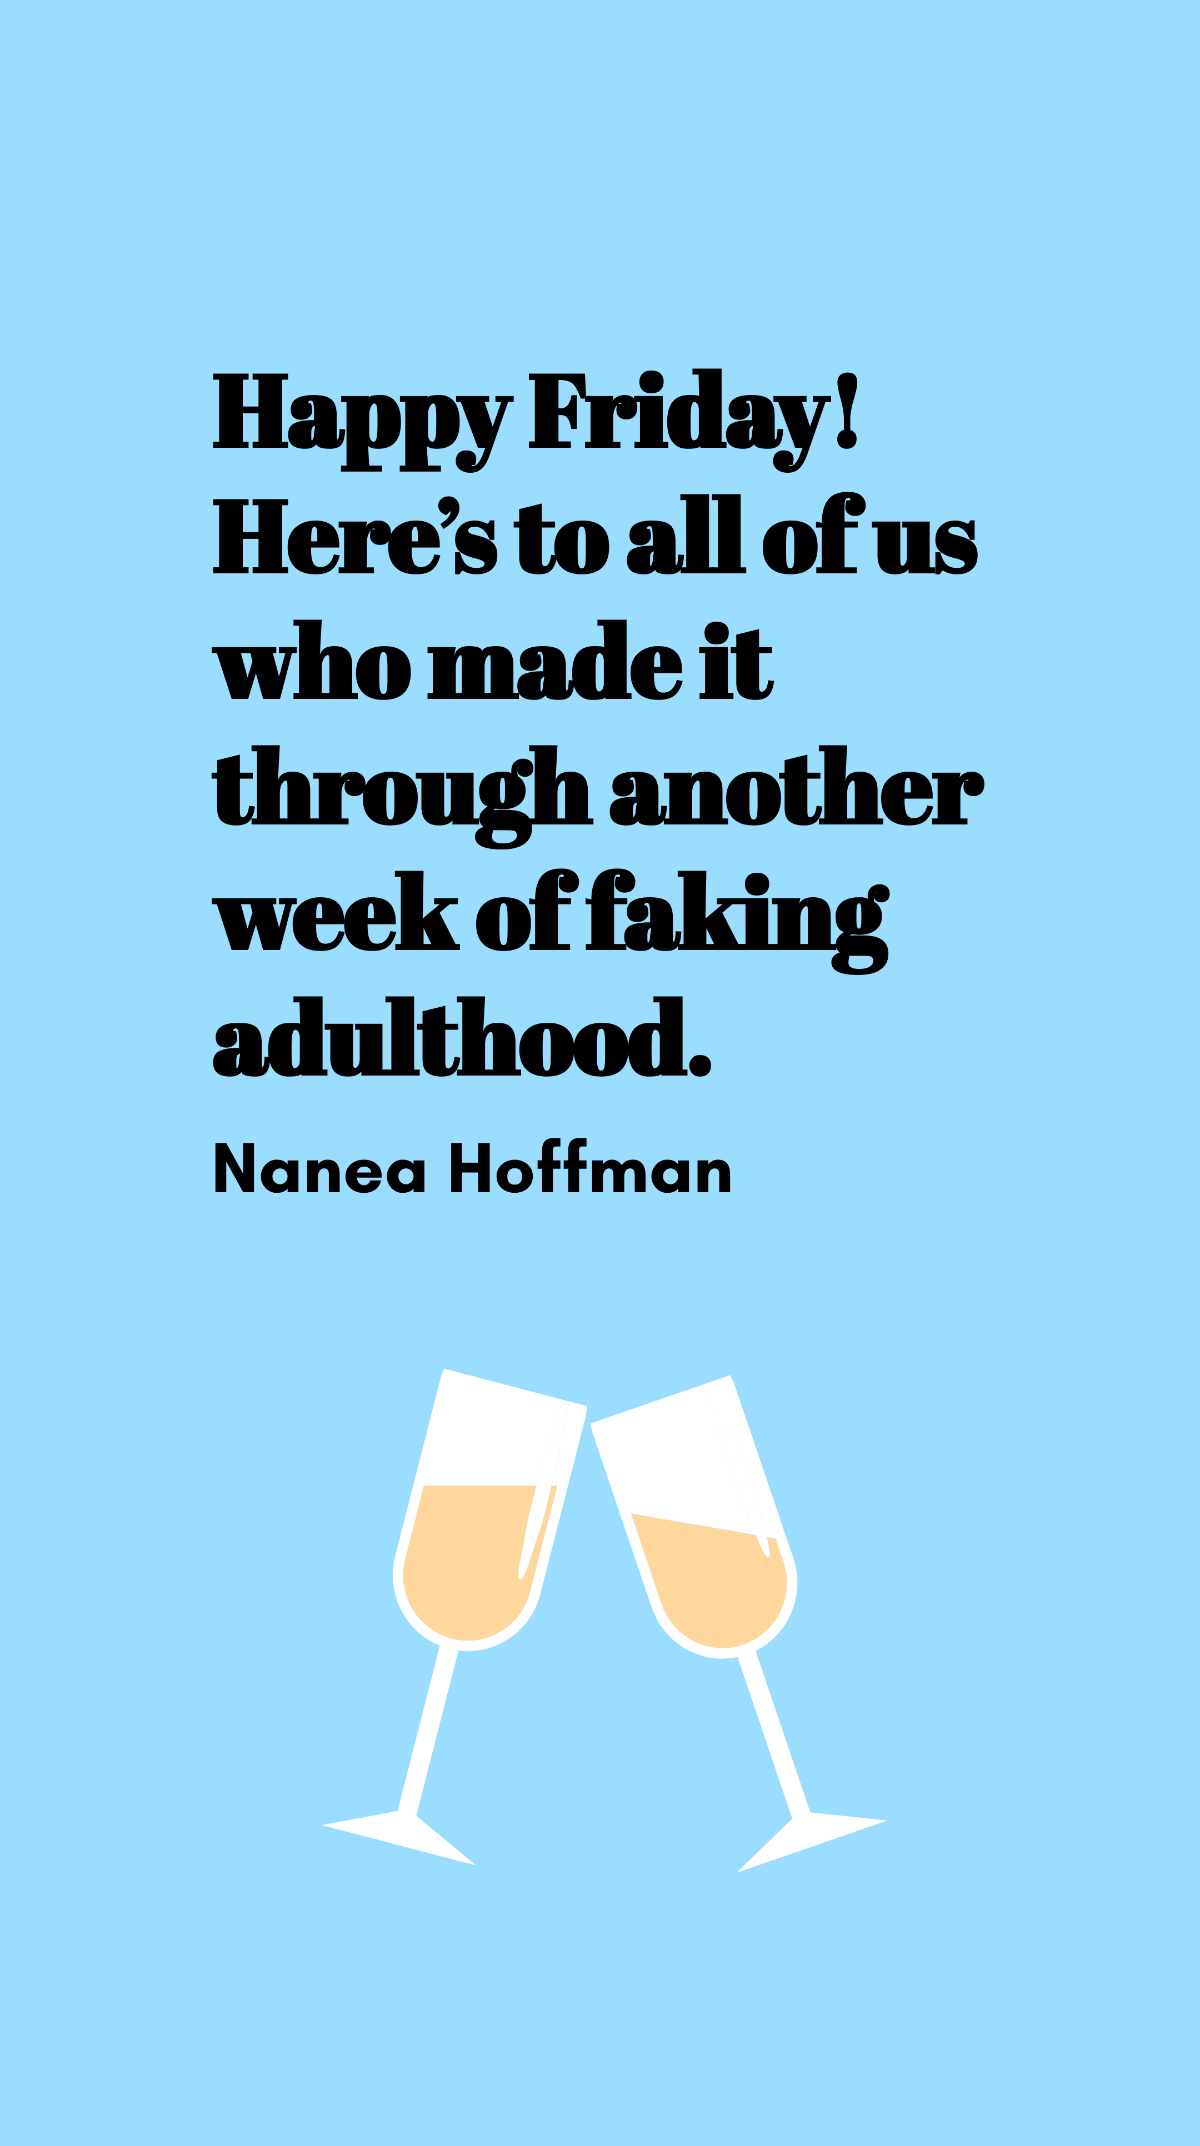 Nanea Hoffman - Happy Friday! Here’s to all of us who made it through another week of faking adulthood.